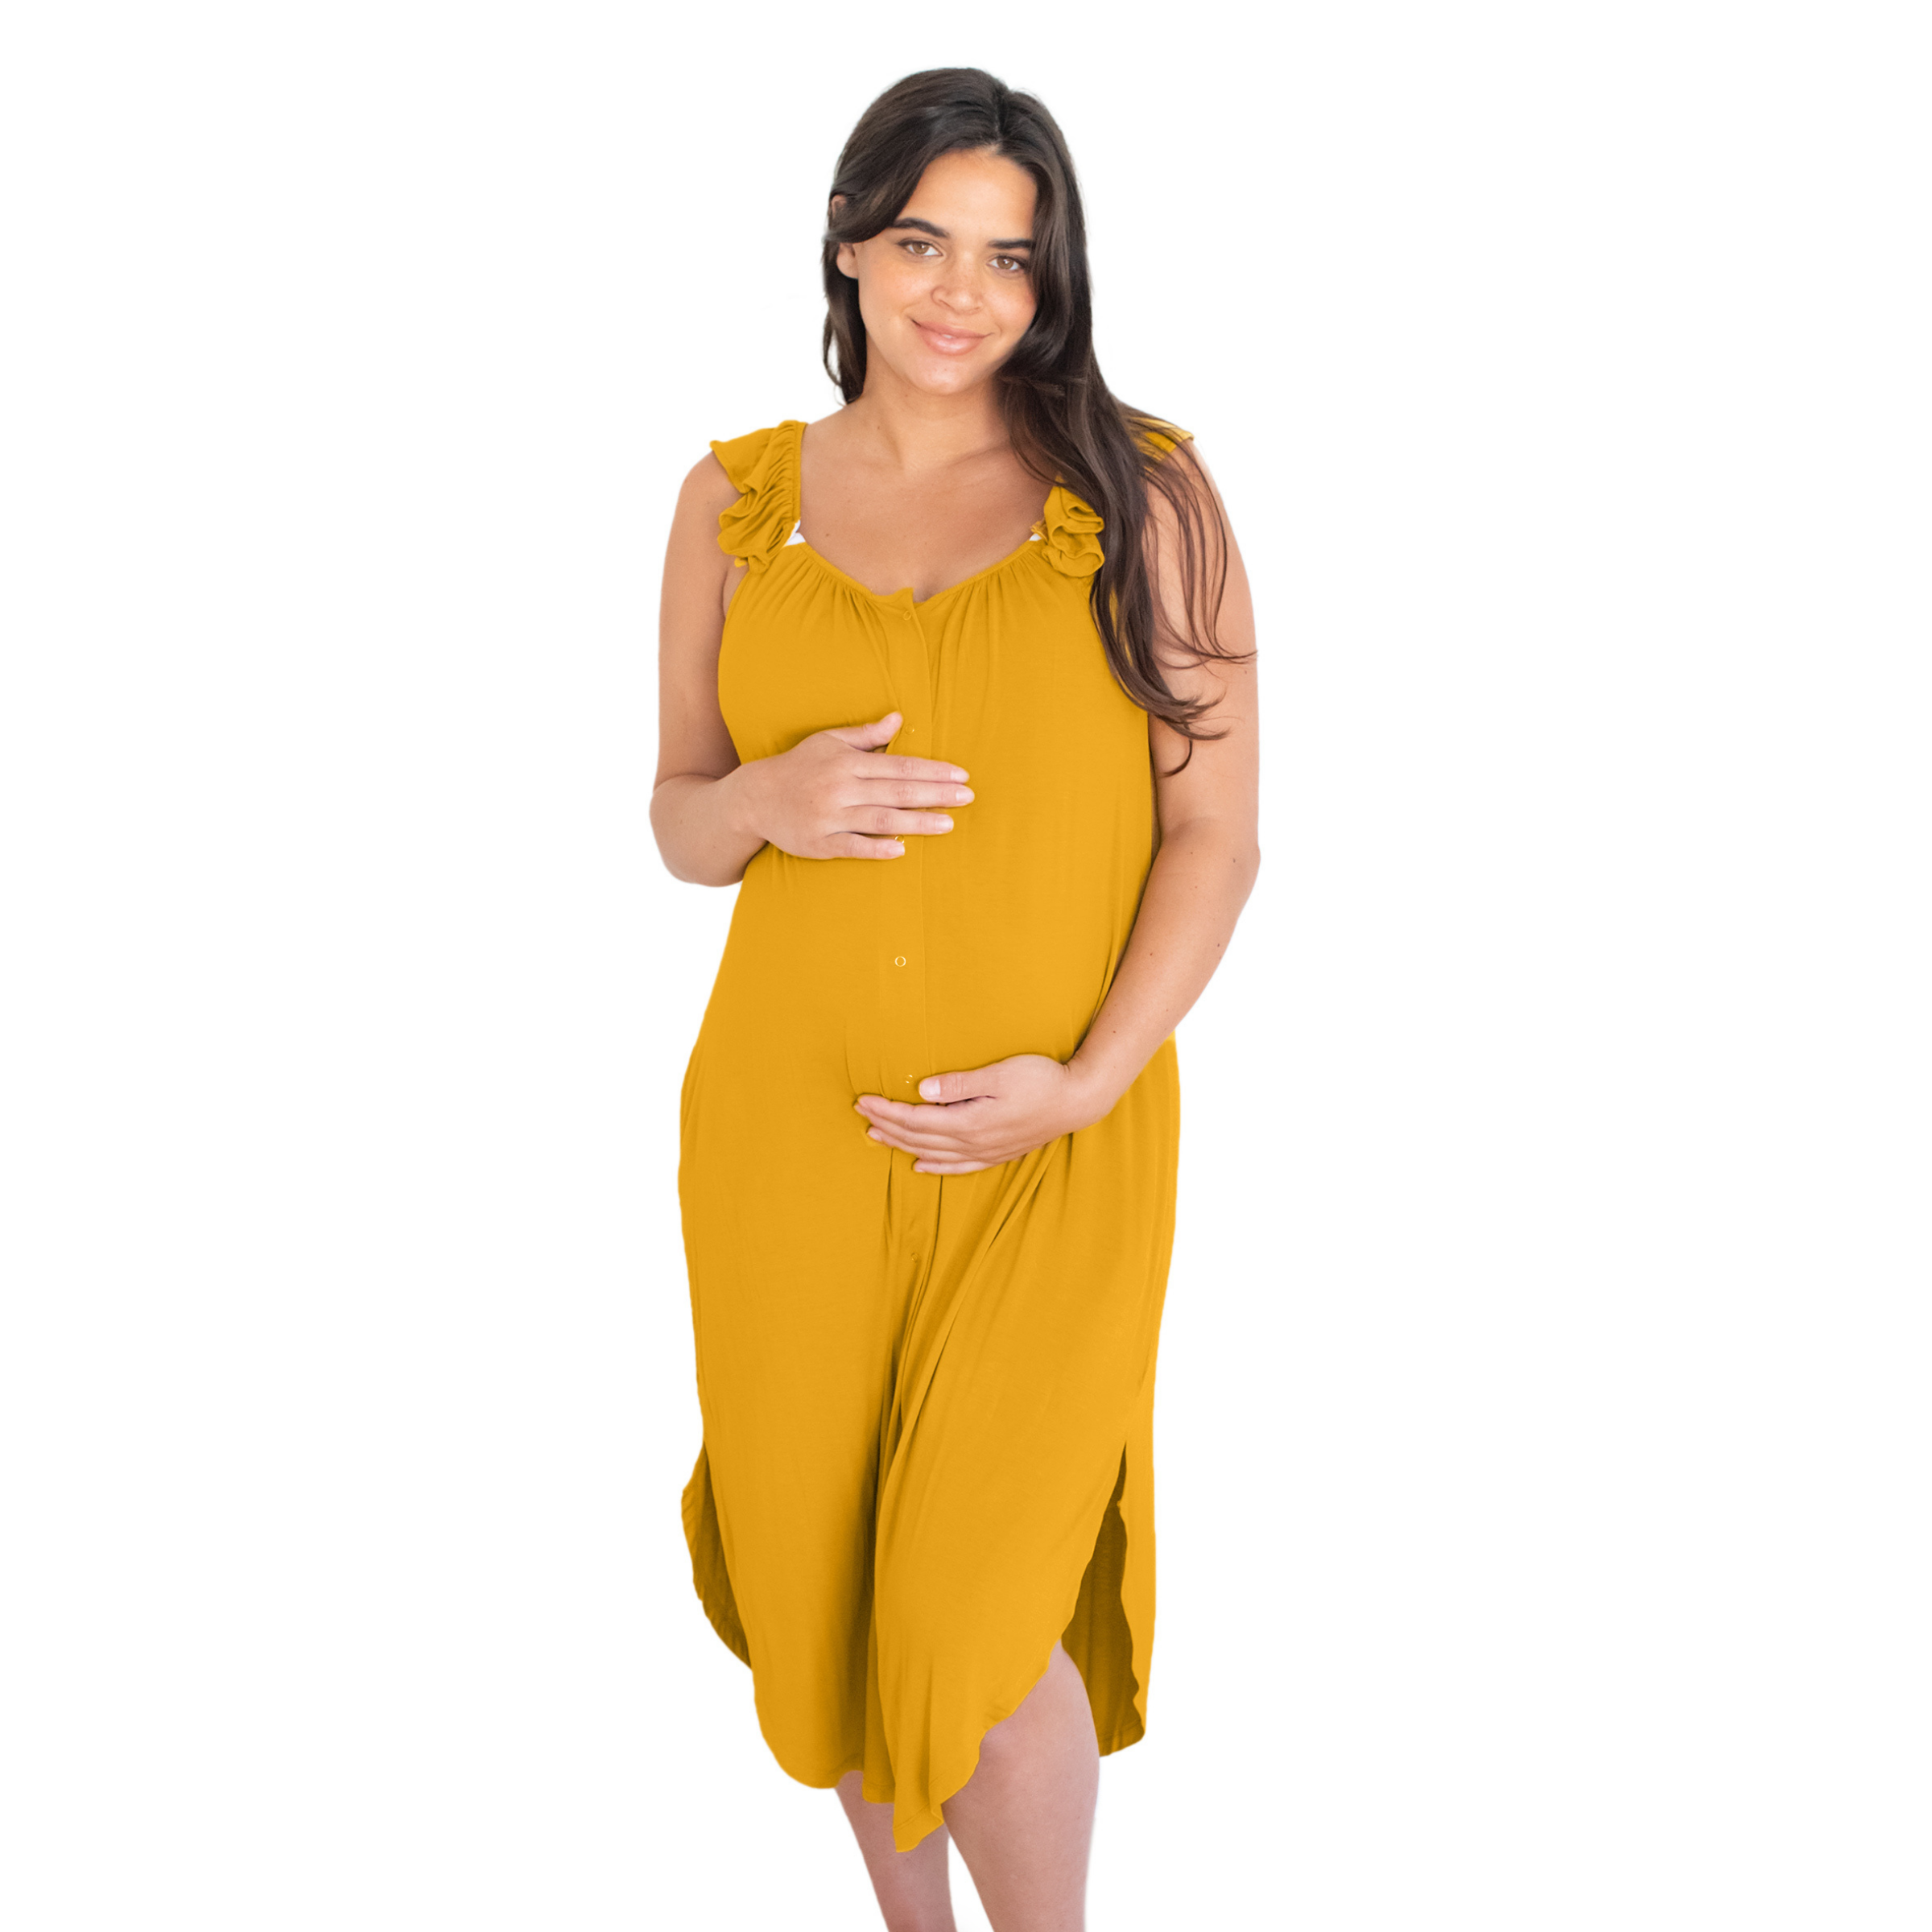 Ruffle Strap Labor & Delivery Gown - Mustard